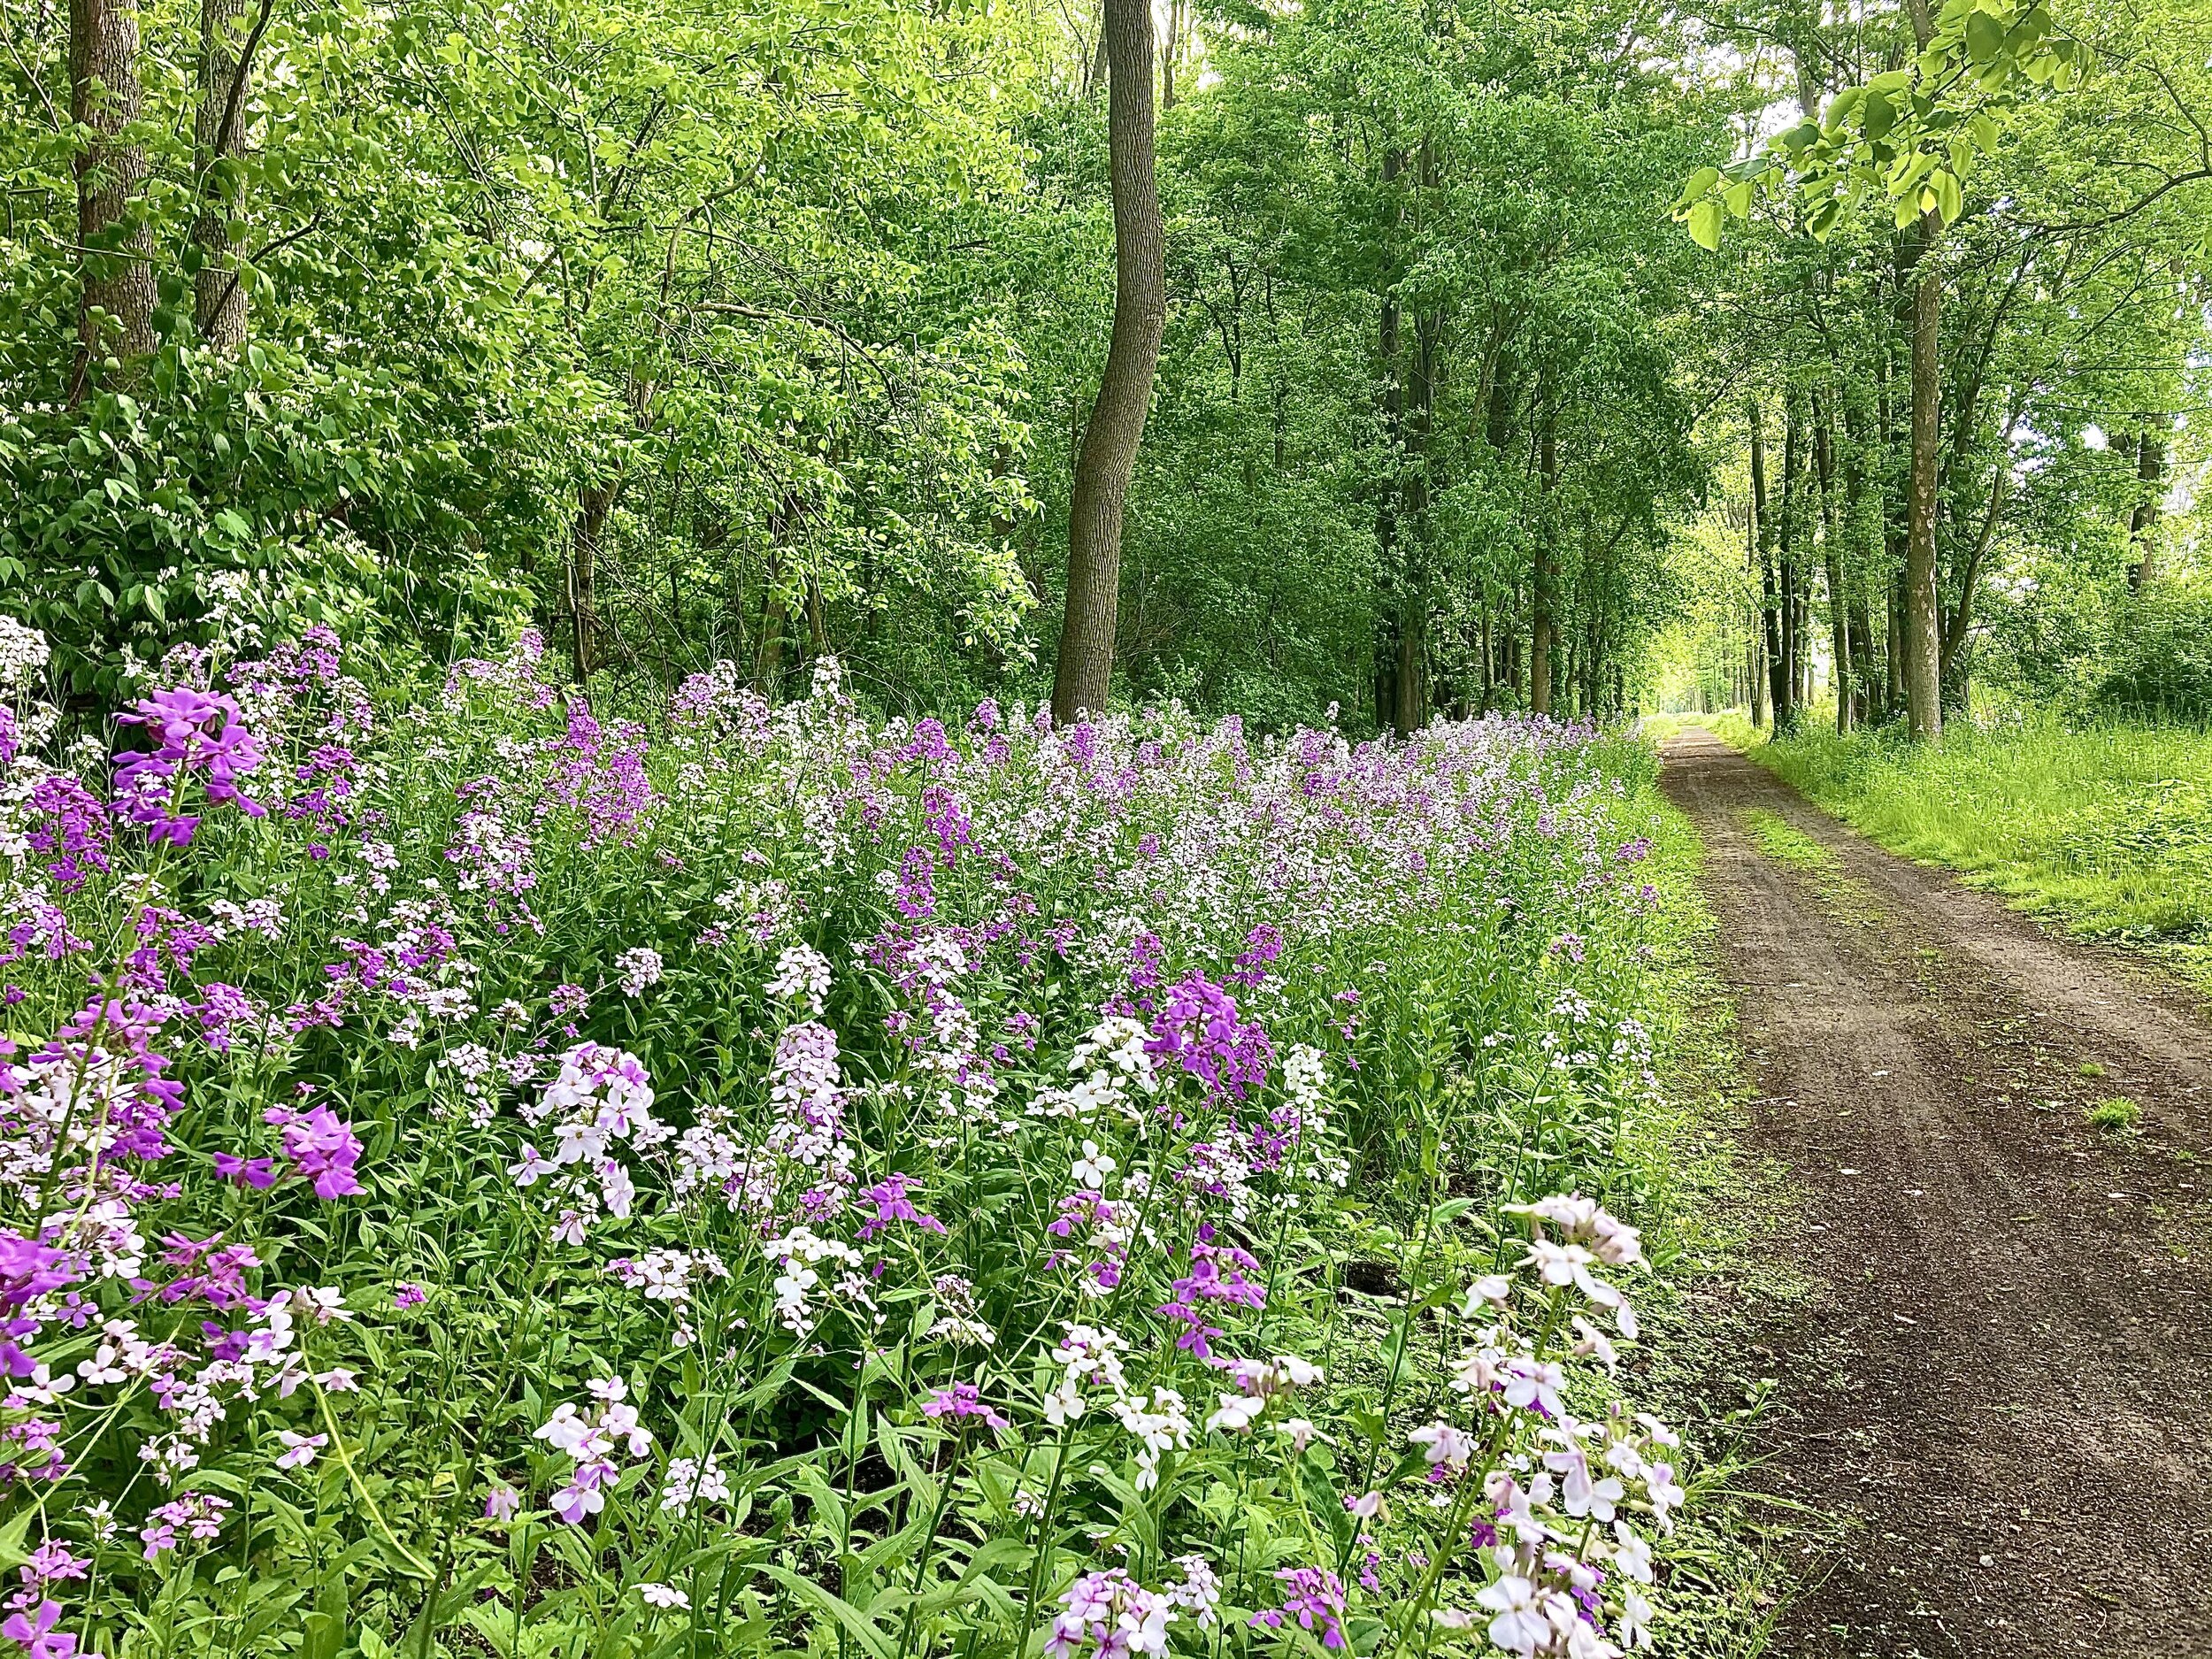 Pink, white, and purple dame's rocket flowers blanket the sides of a dirt path, with dark green leafy trees behind